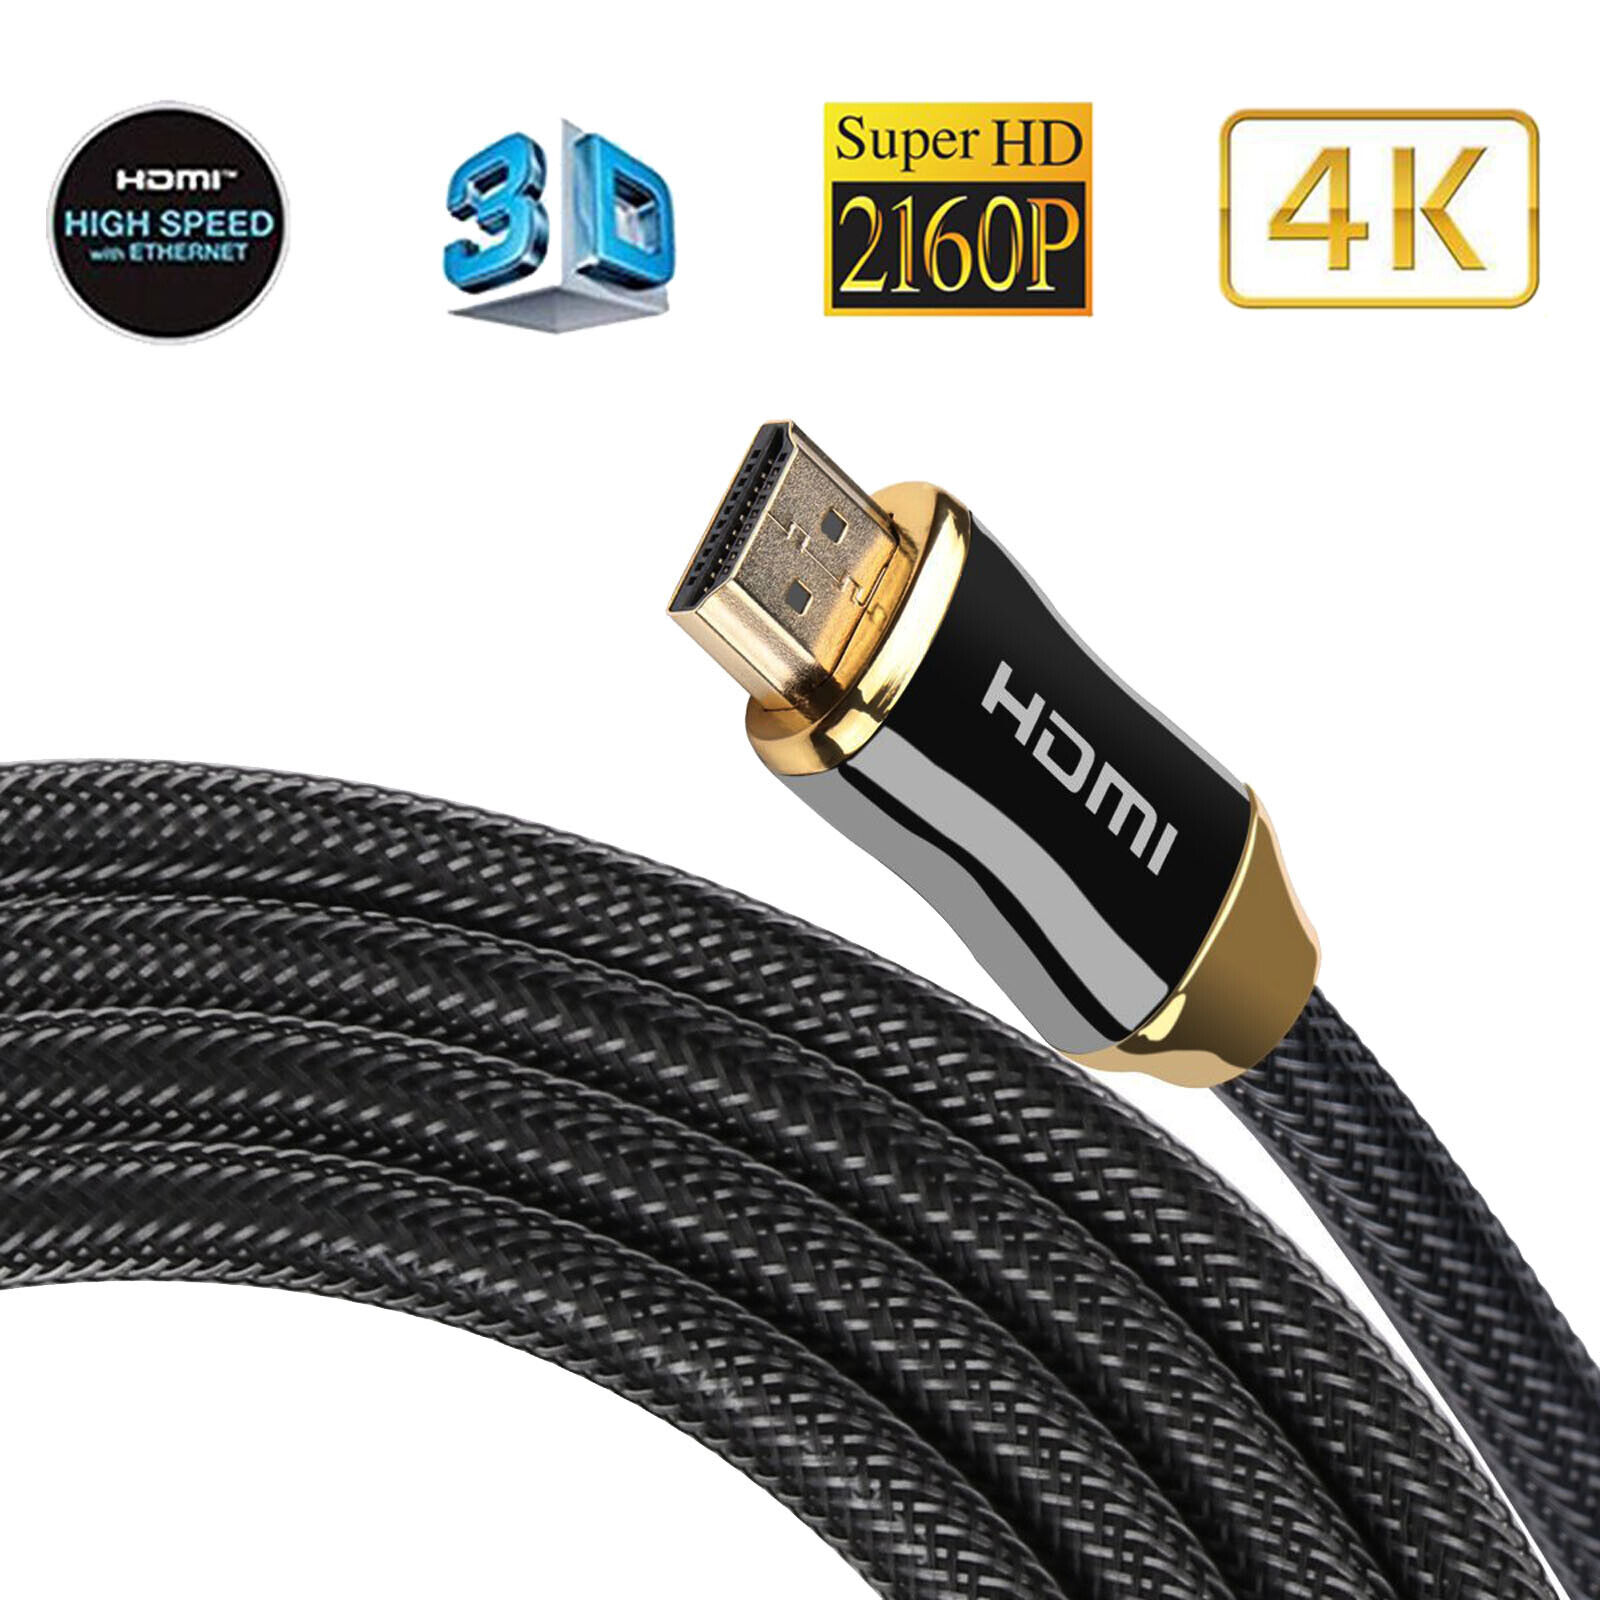 HDMI Cable(10 Feet Yellow) Ultra HDMI 2.0V Support 2160P,1080P,3D,ARC- 1 Pack | eBay